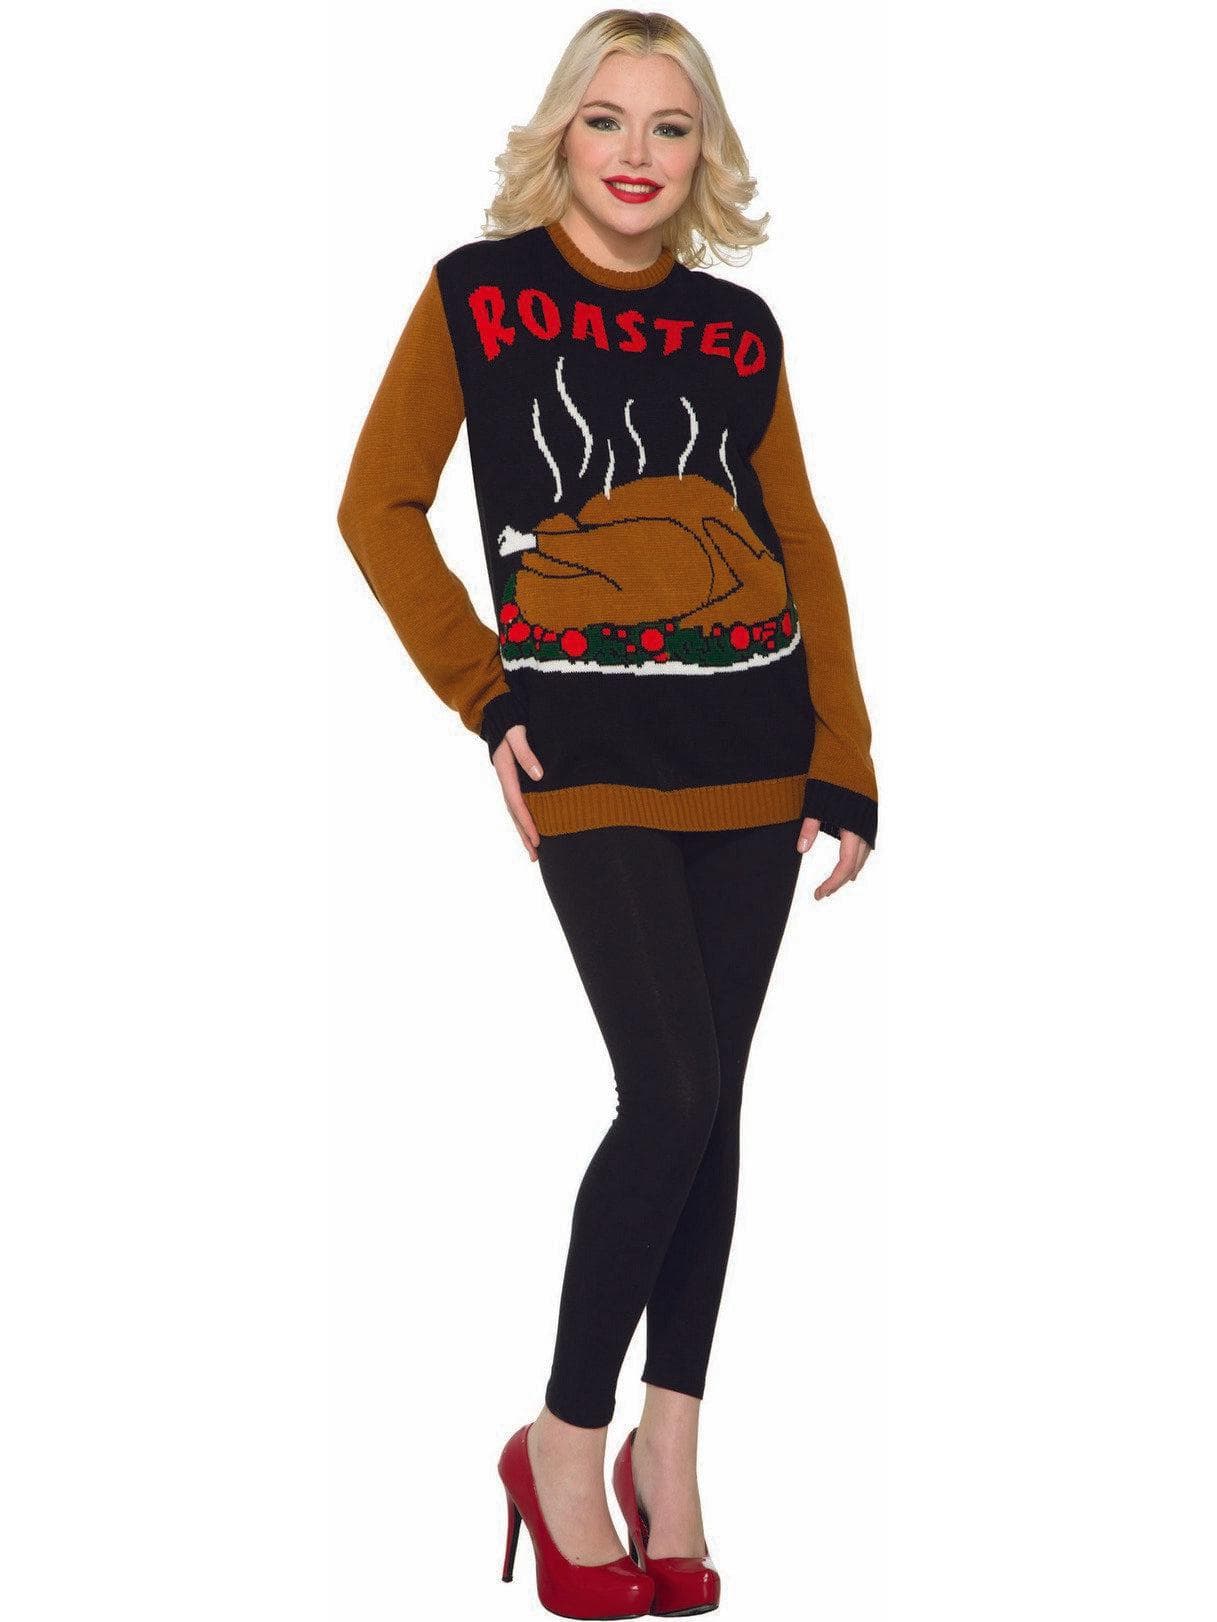 Adult Roasted Thanksgiving Sweater Costume - costumes.com